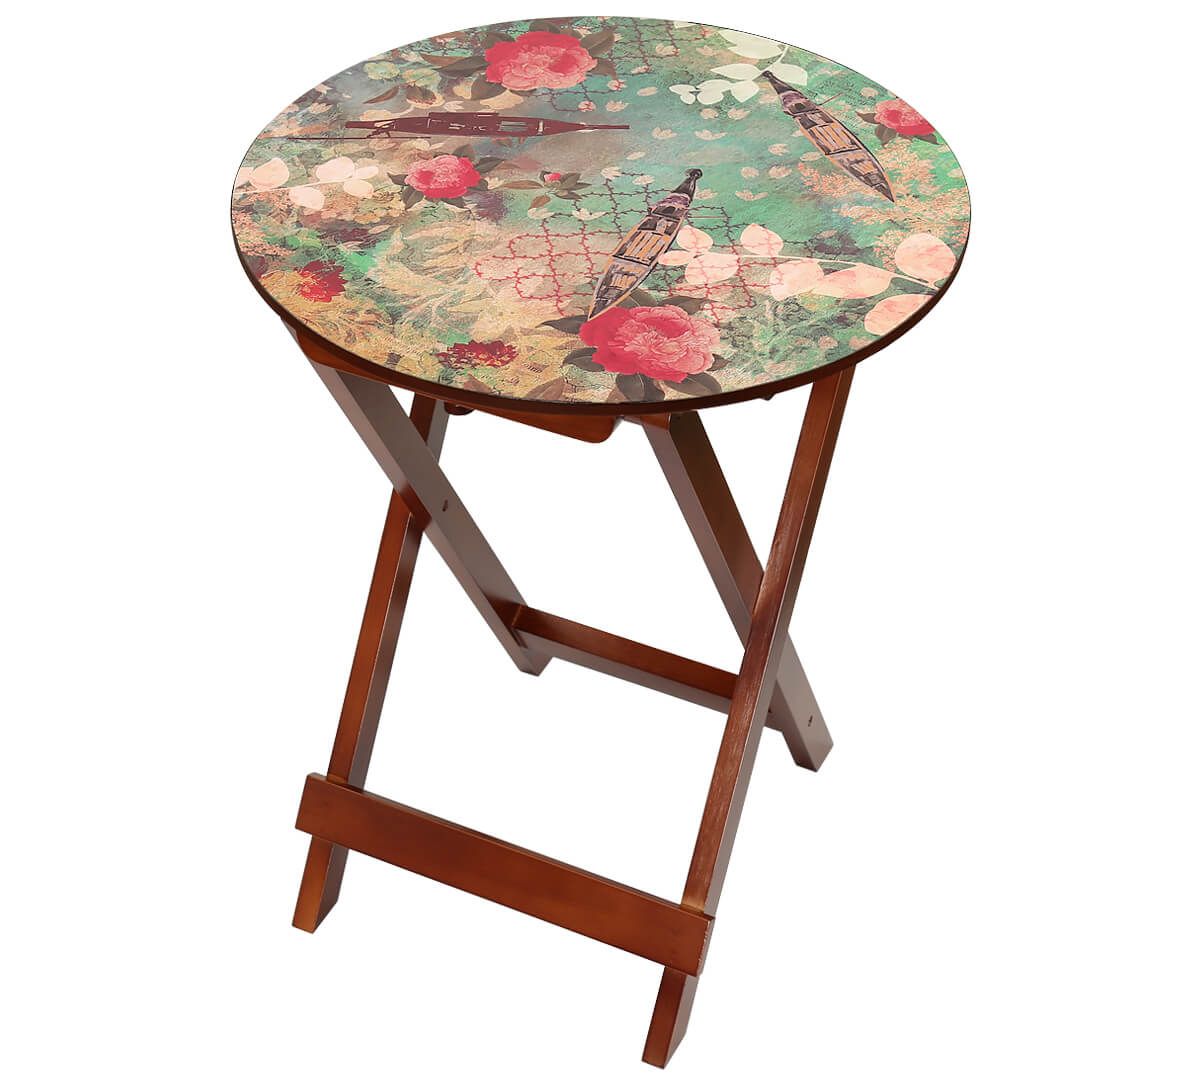 India Circus by Krsnaa Mehta Floral Lake Inception Round Side Table